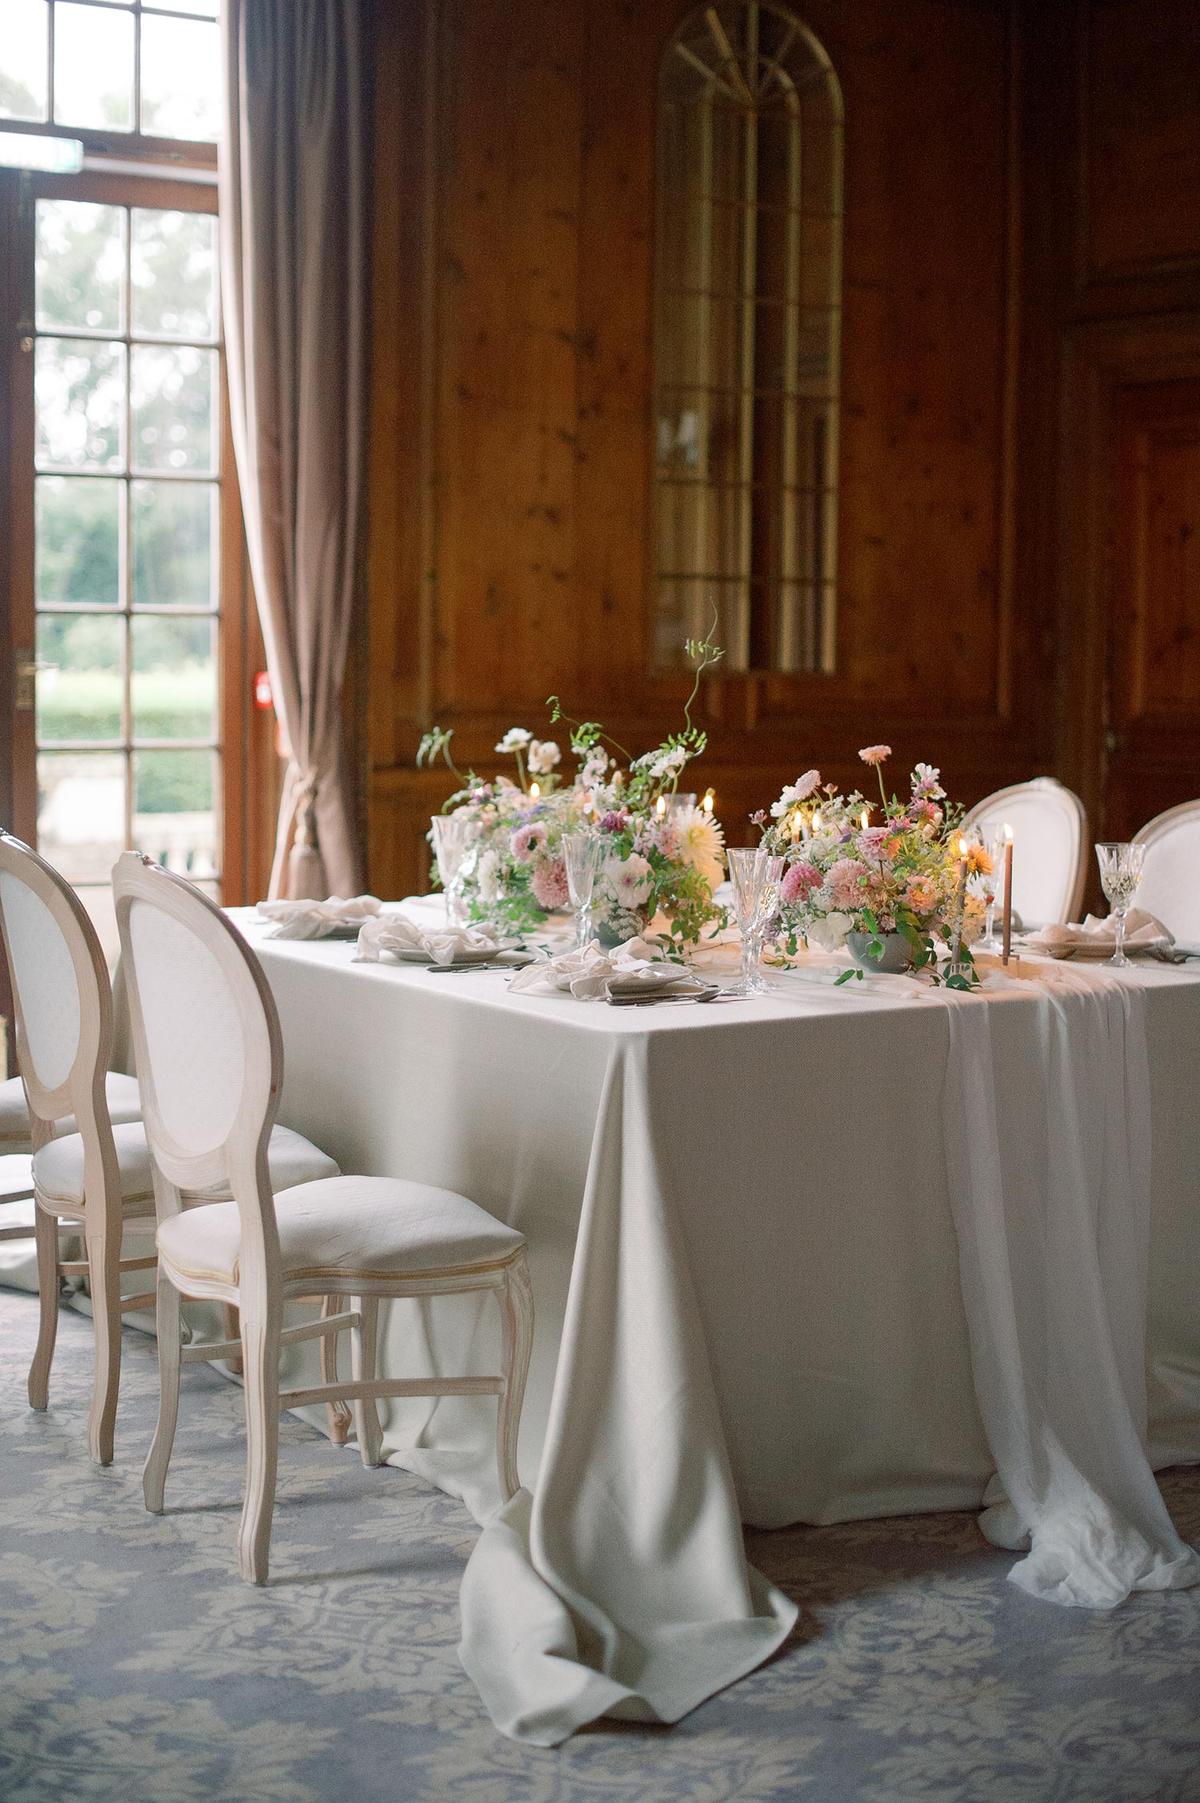 spring ballroom wedding reception with a neutral table linen, soft silk runner and low garden centerpieces mixed with skinny taper candles; photography by Julie Livingston at an English country estate Hedsor House with planning and design by Willow and Oak Events